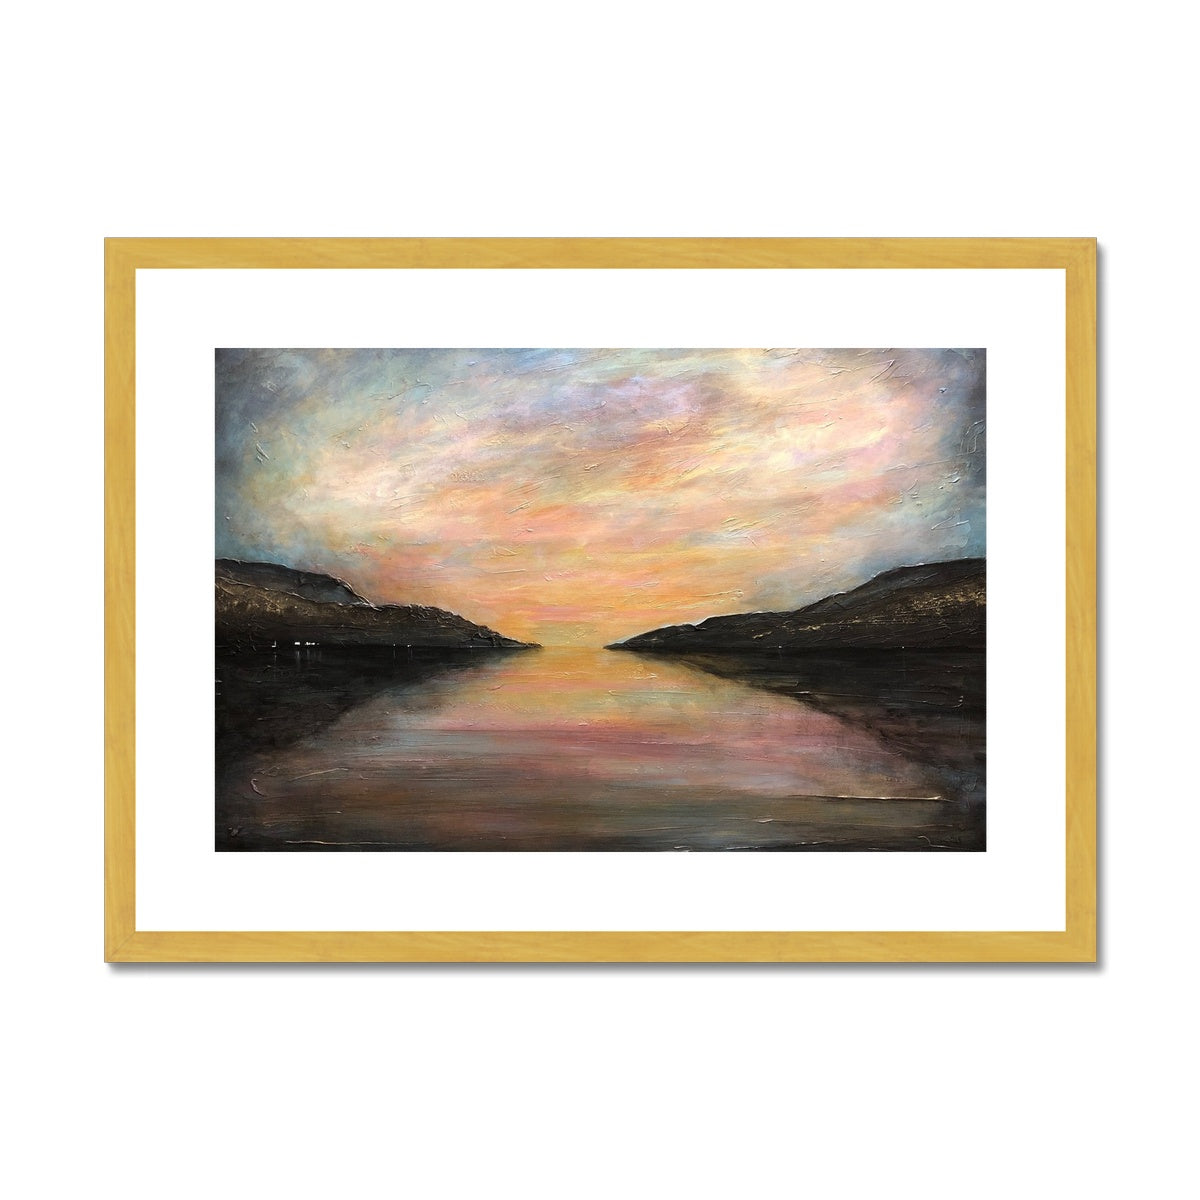 Loch Ness Glow Painting | Antique Framed & Mounted Prints From Scotland-Antique Framed & Mounted Prints-Scottish Lochs & Mountains Art Gallery-A2 Landscape-Gold Frame-Paintings, Prints, Homeware, Art Gifts From Scotland By Scottish Artist Kevin Hunter